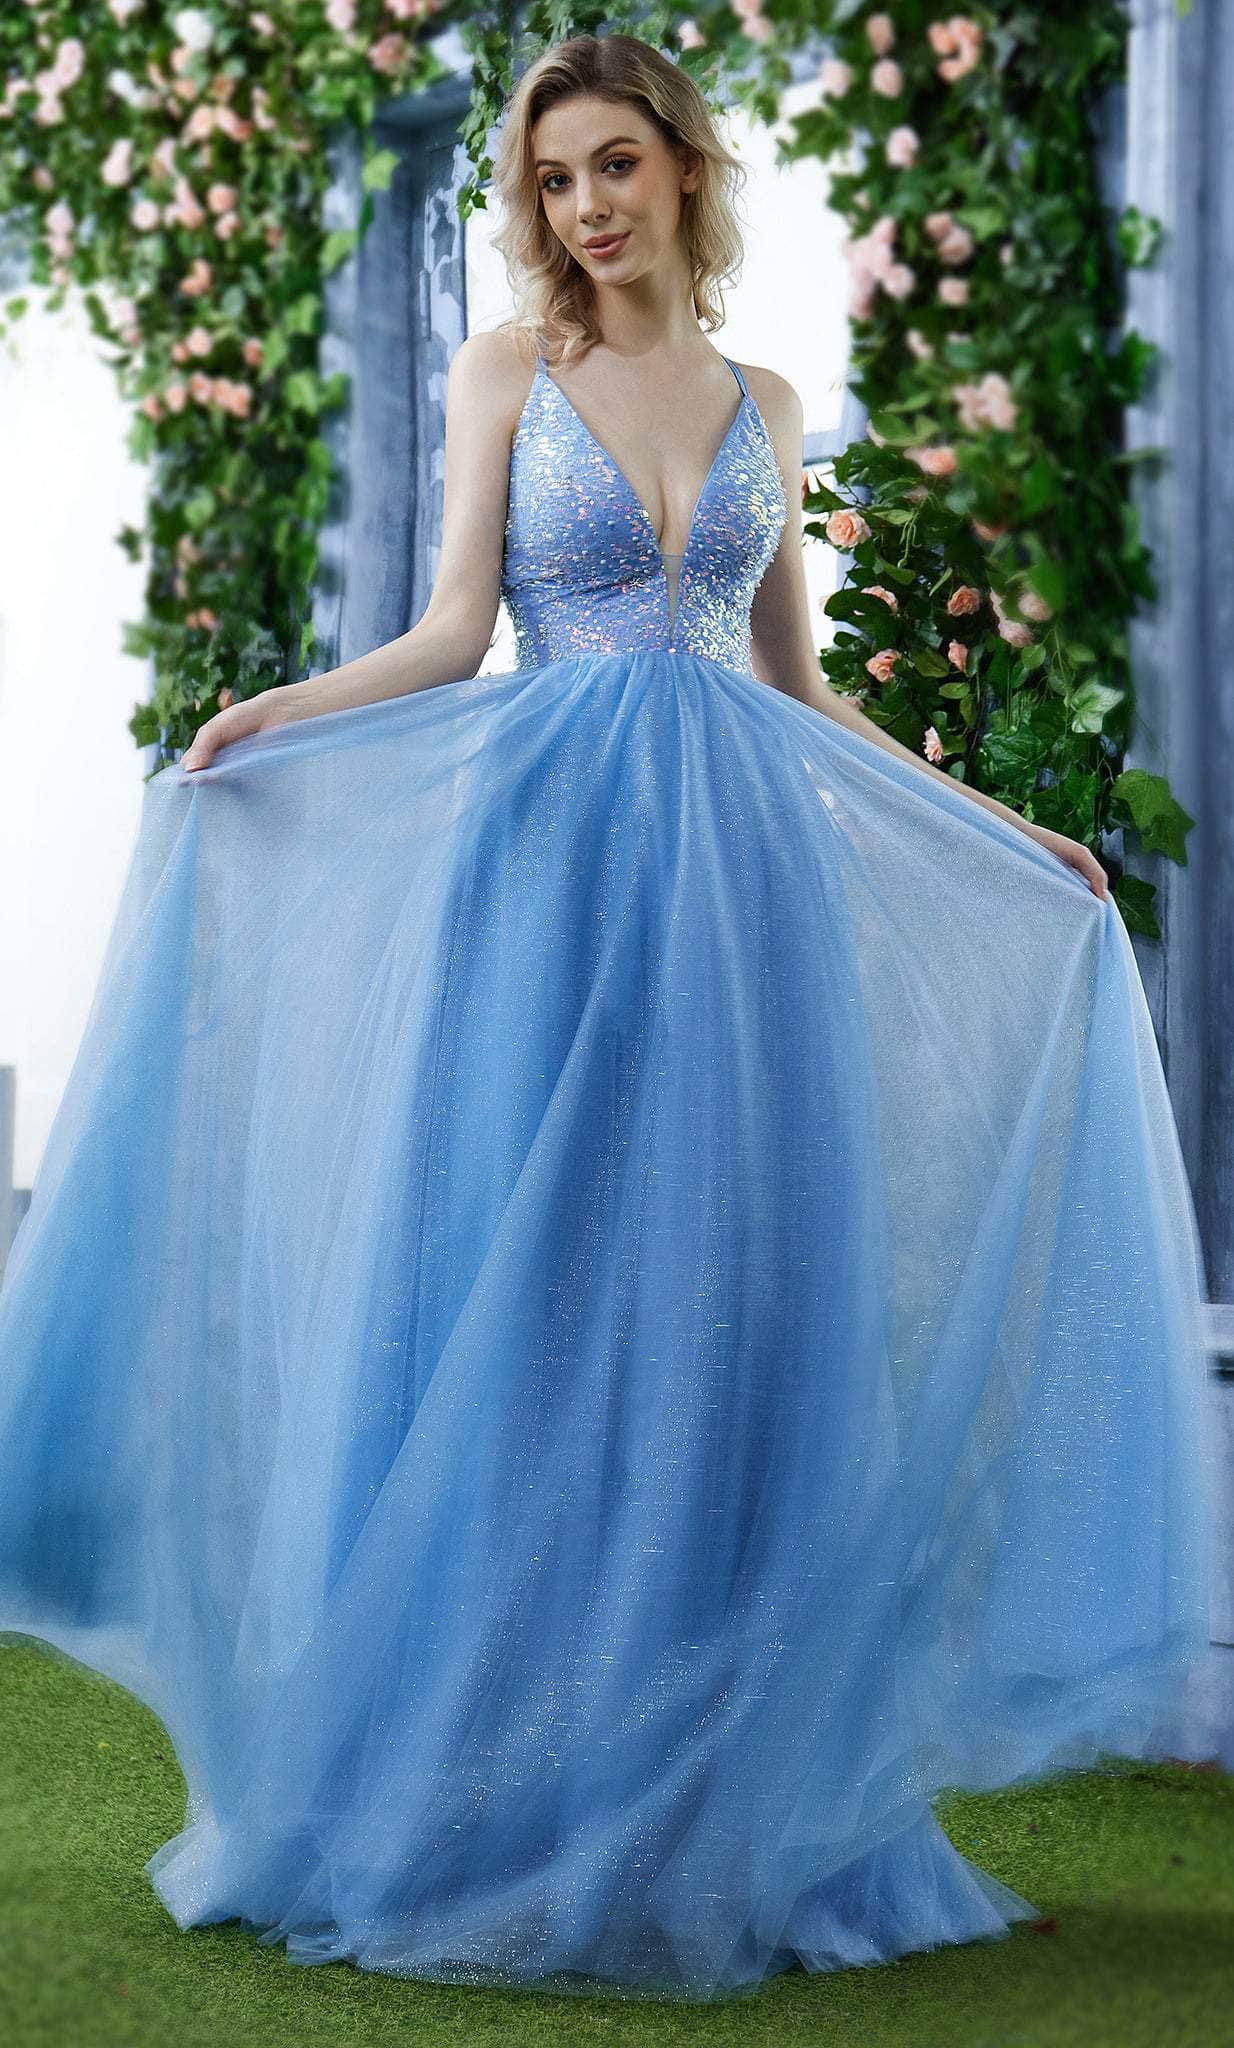 Image of J'Adore Dresses J22042 - Beaded Bodice Tulle Ballgown